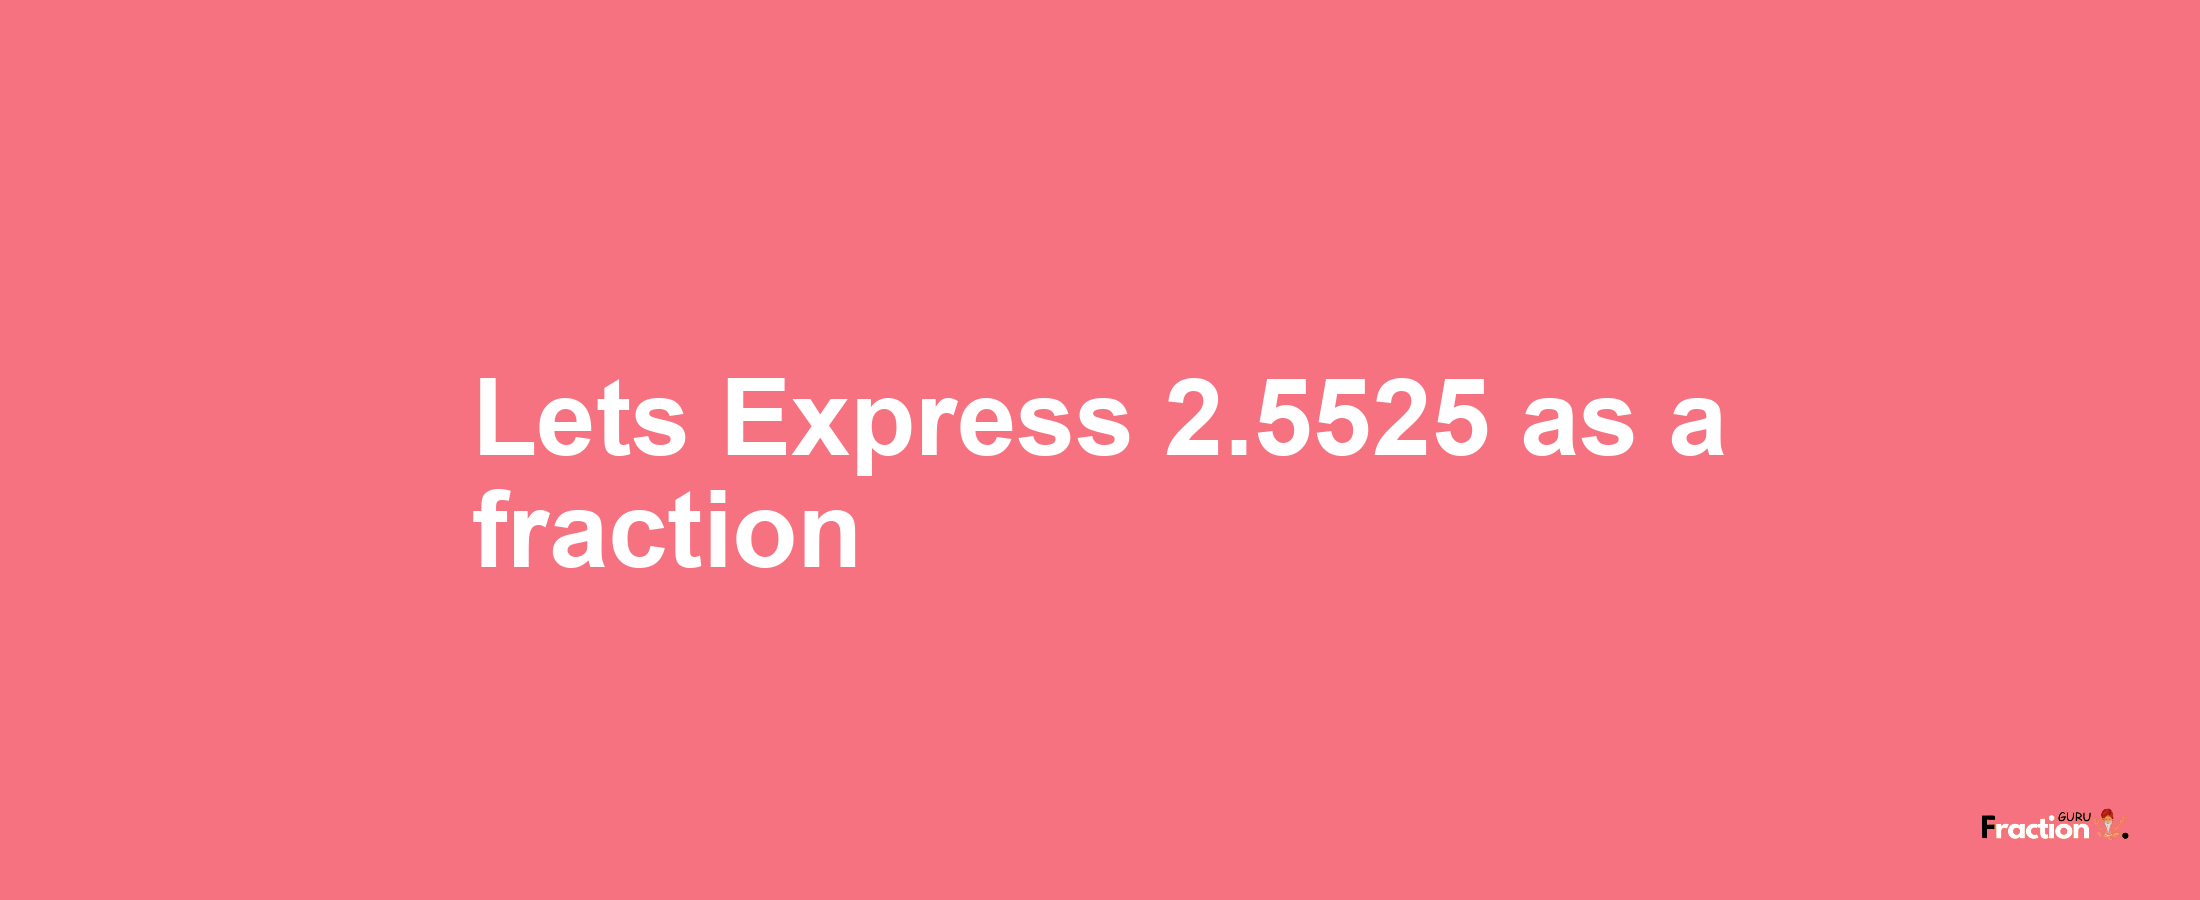 Lets Express 2.5525 as afraction